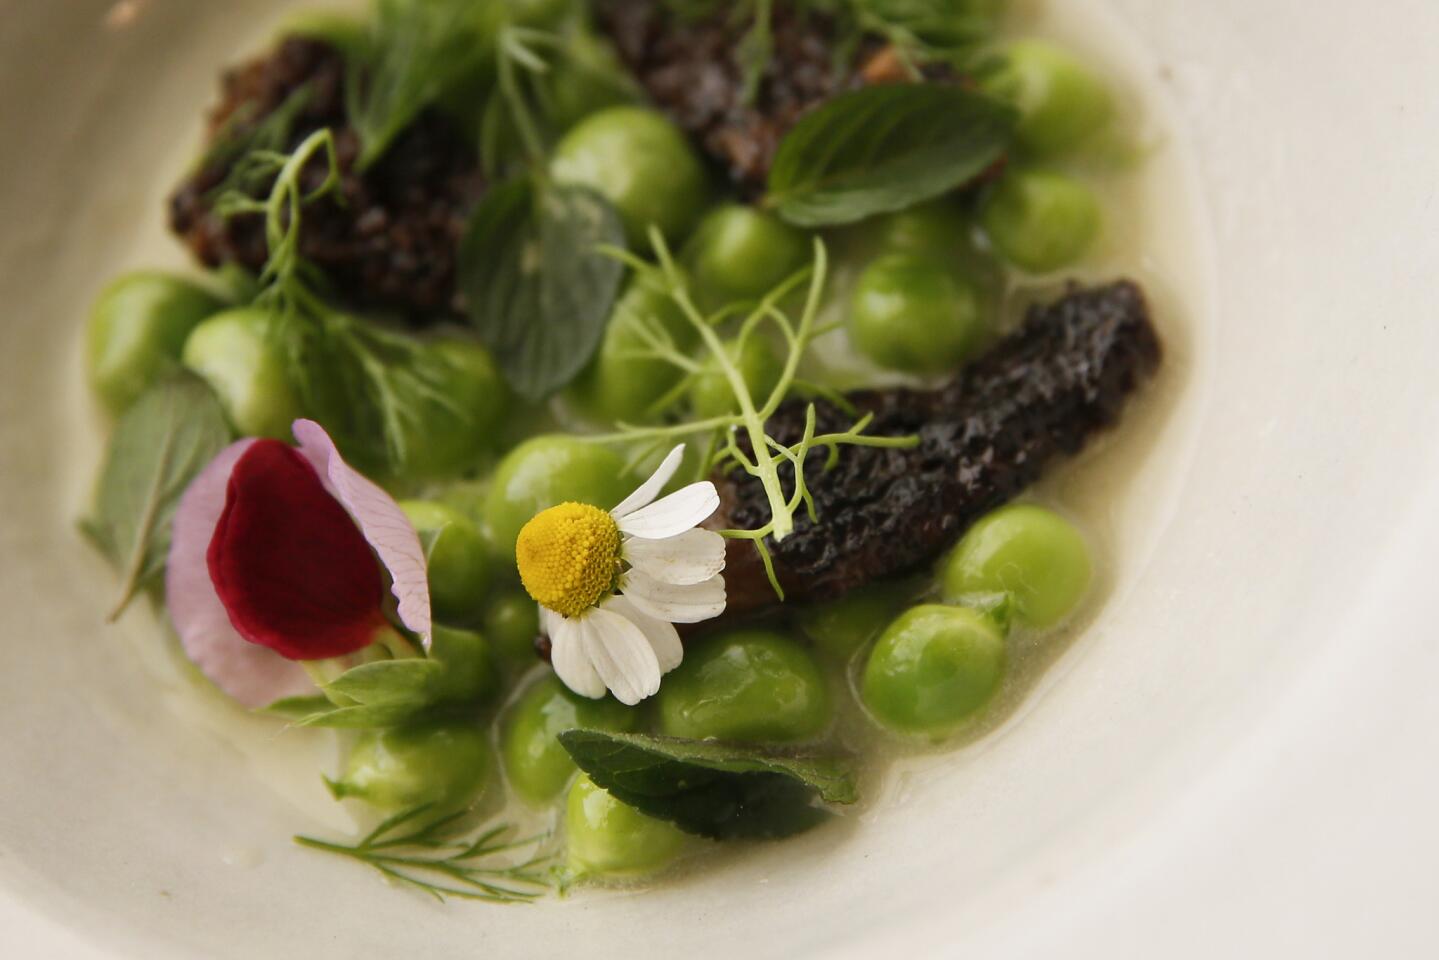 A warm salad of peas, morels and mint at Alma restaurant in downtown Los Angeles.